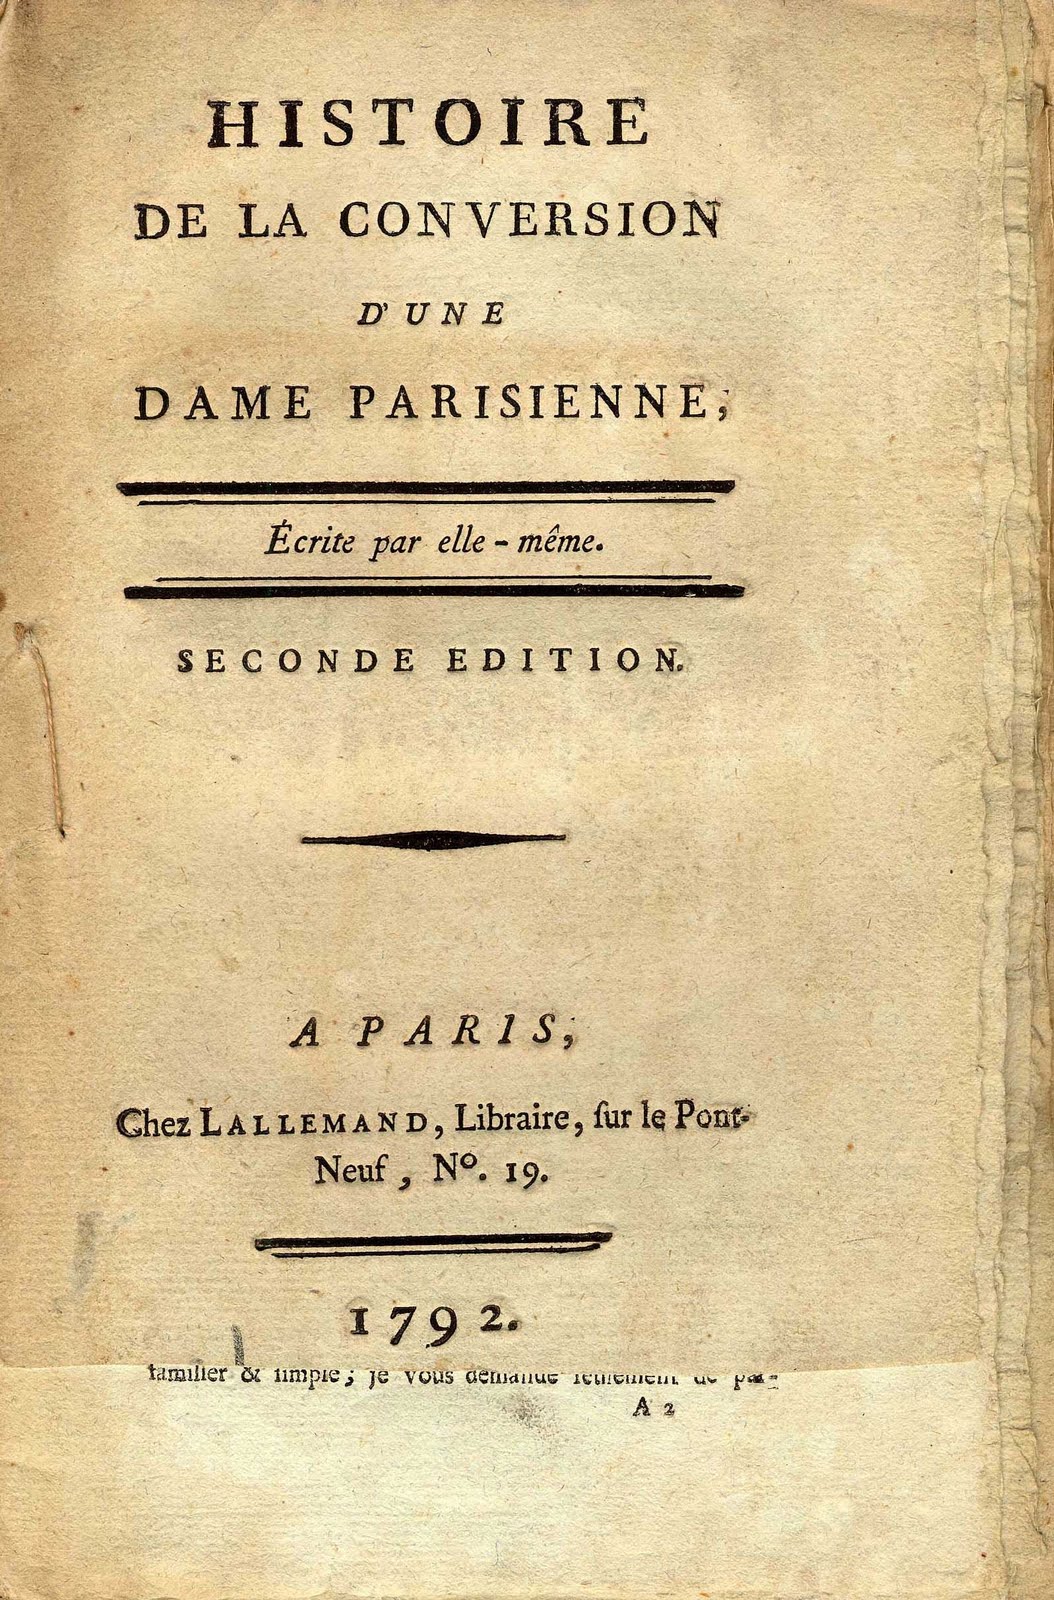 Titel page of a pamphlet titled "The History of the Conversion of a Parisian Woman, Written by Herself." 